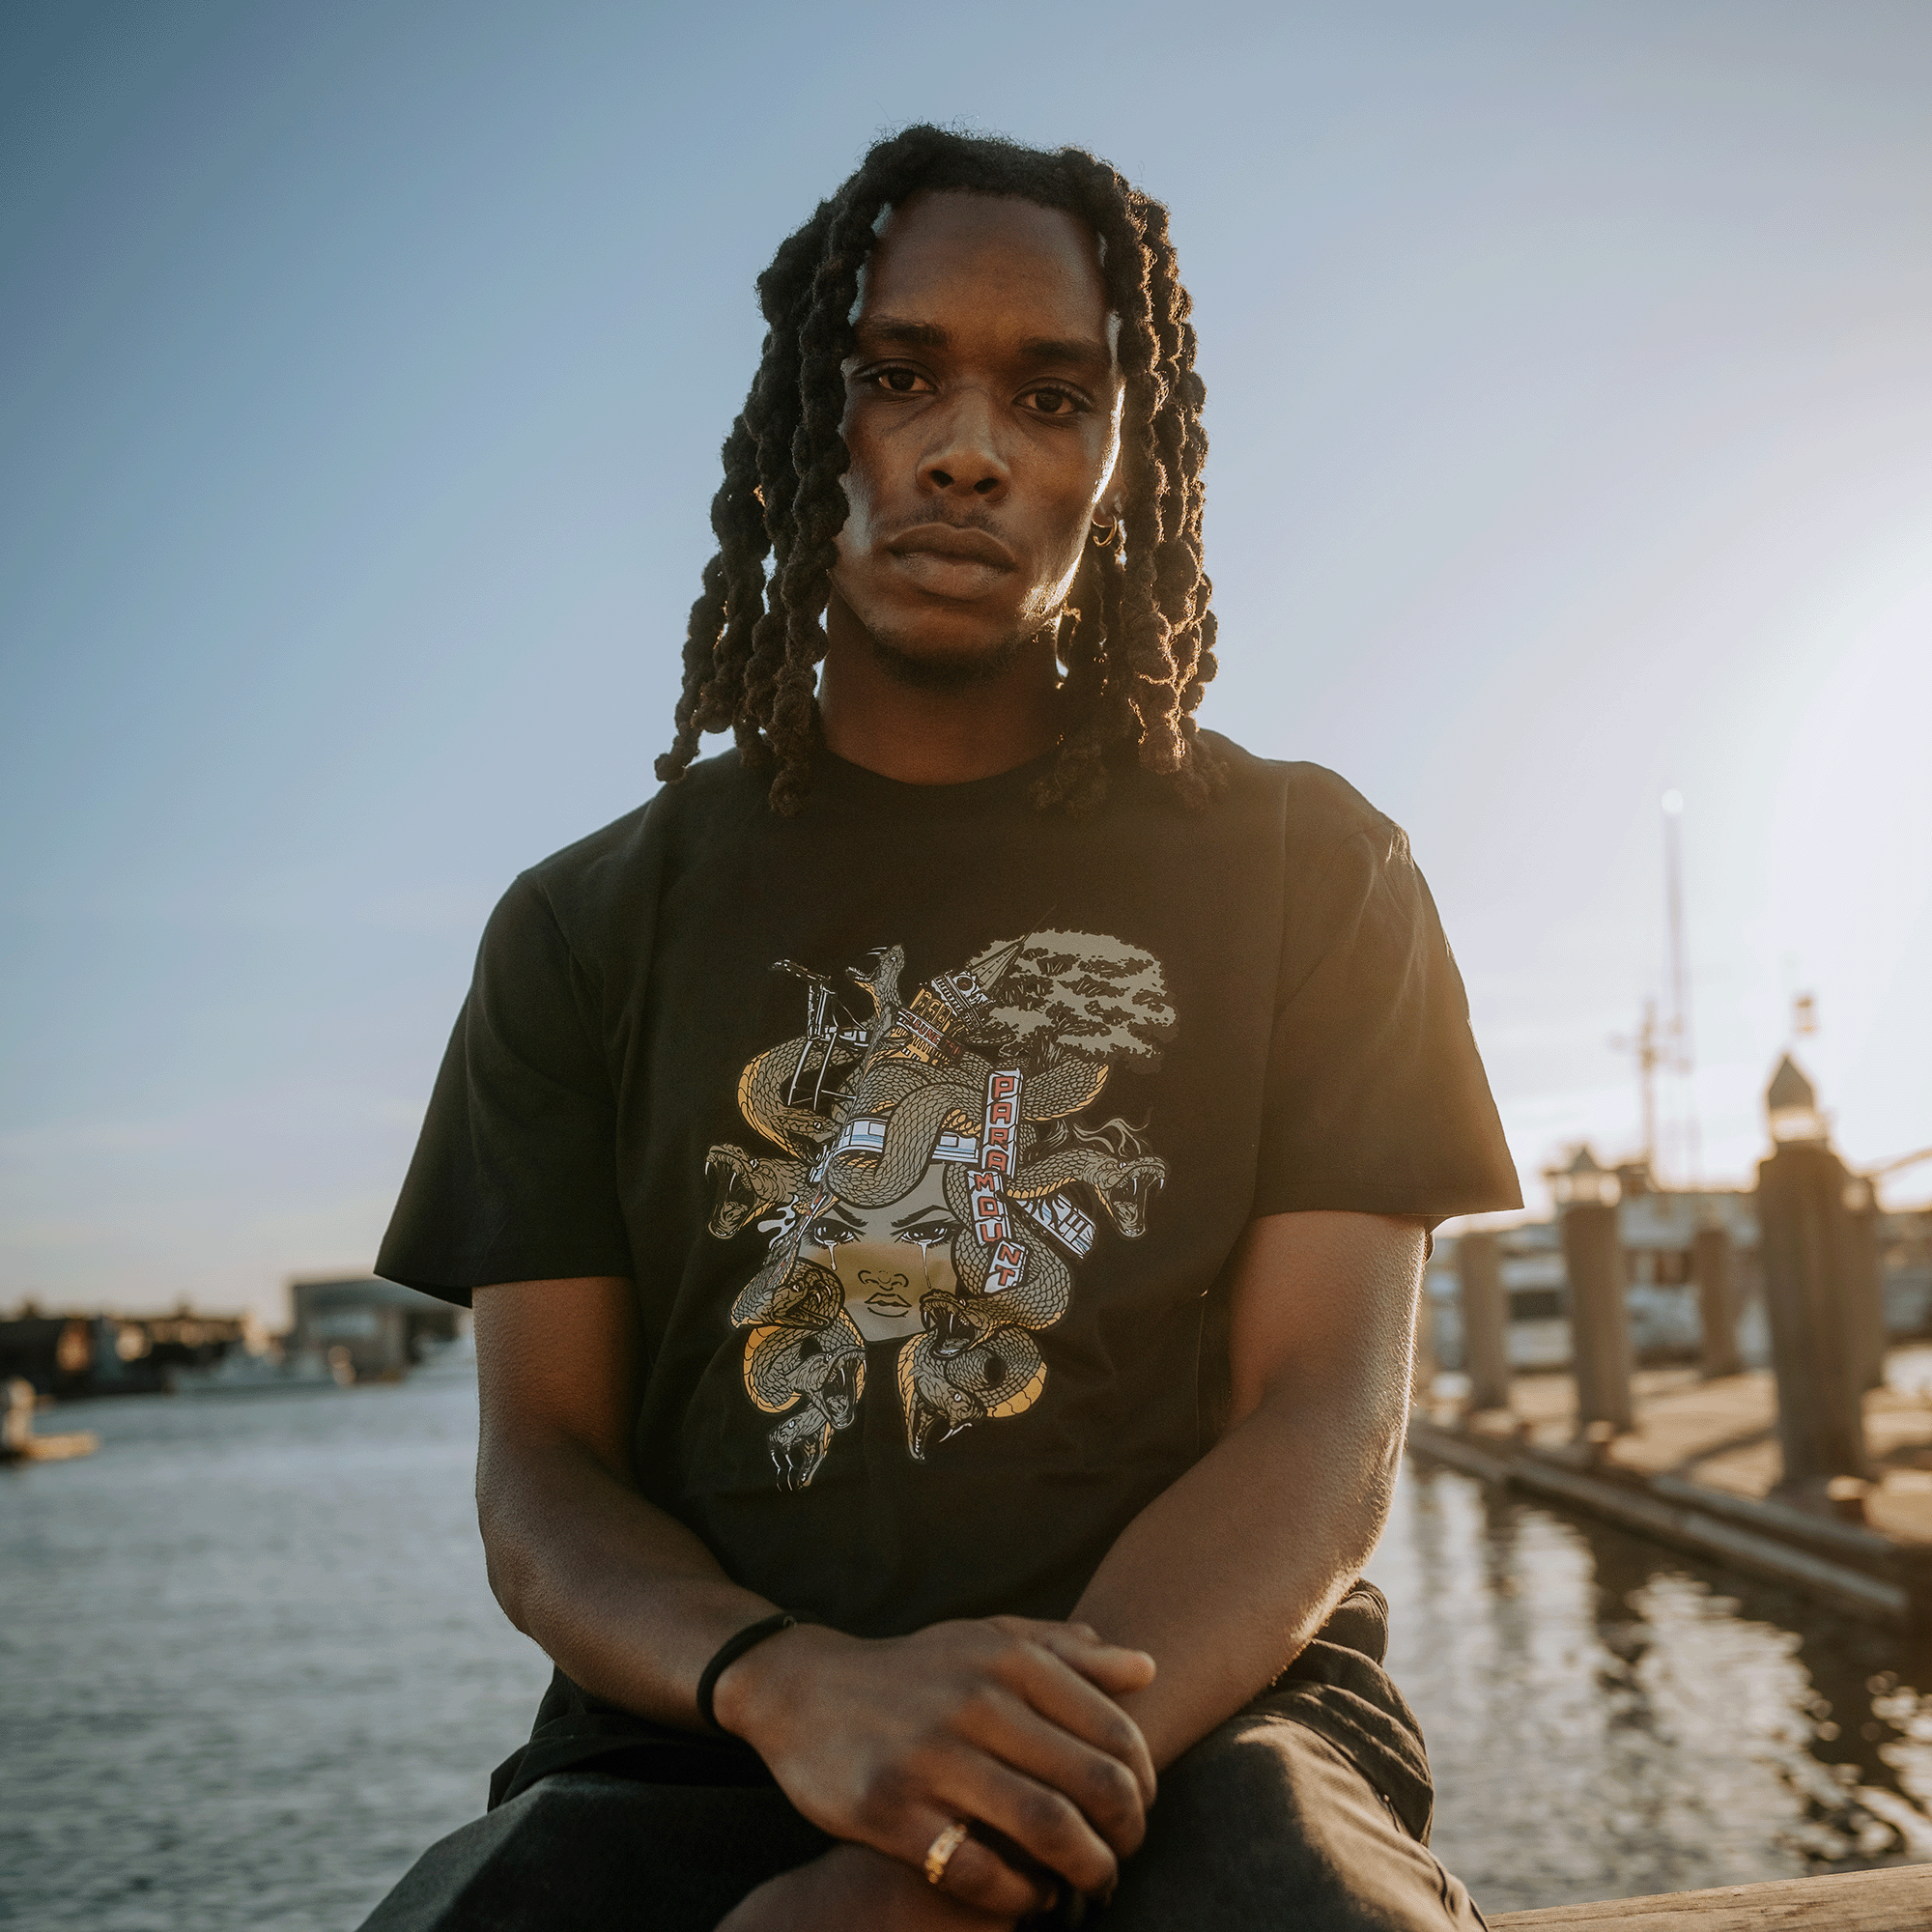 Model wearing a black t-shirt with elaborate Medusa monster of the mind graphic while sitting on dock.